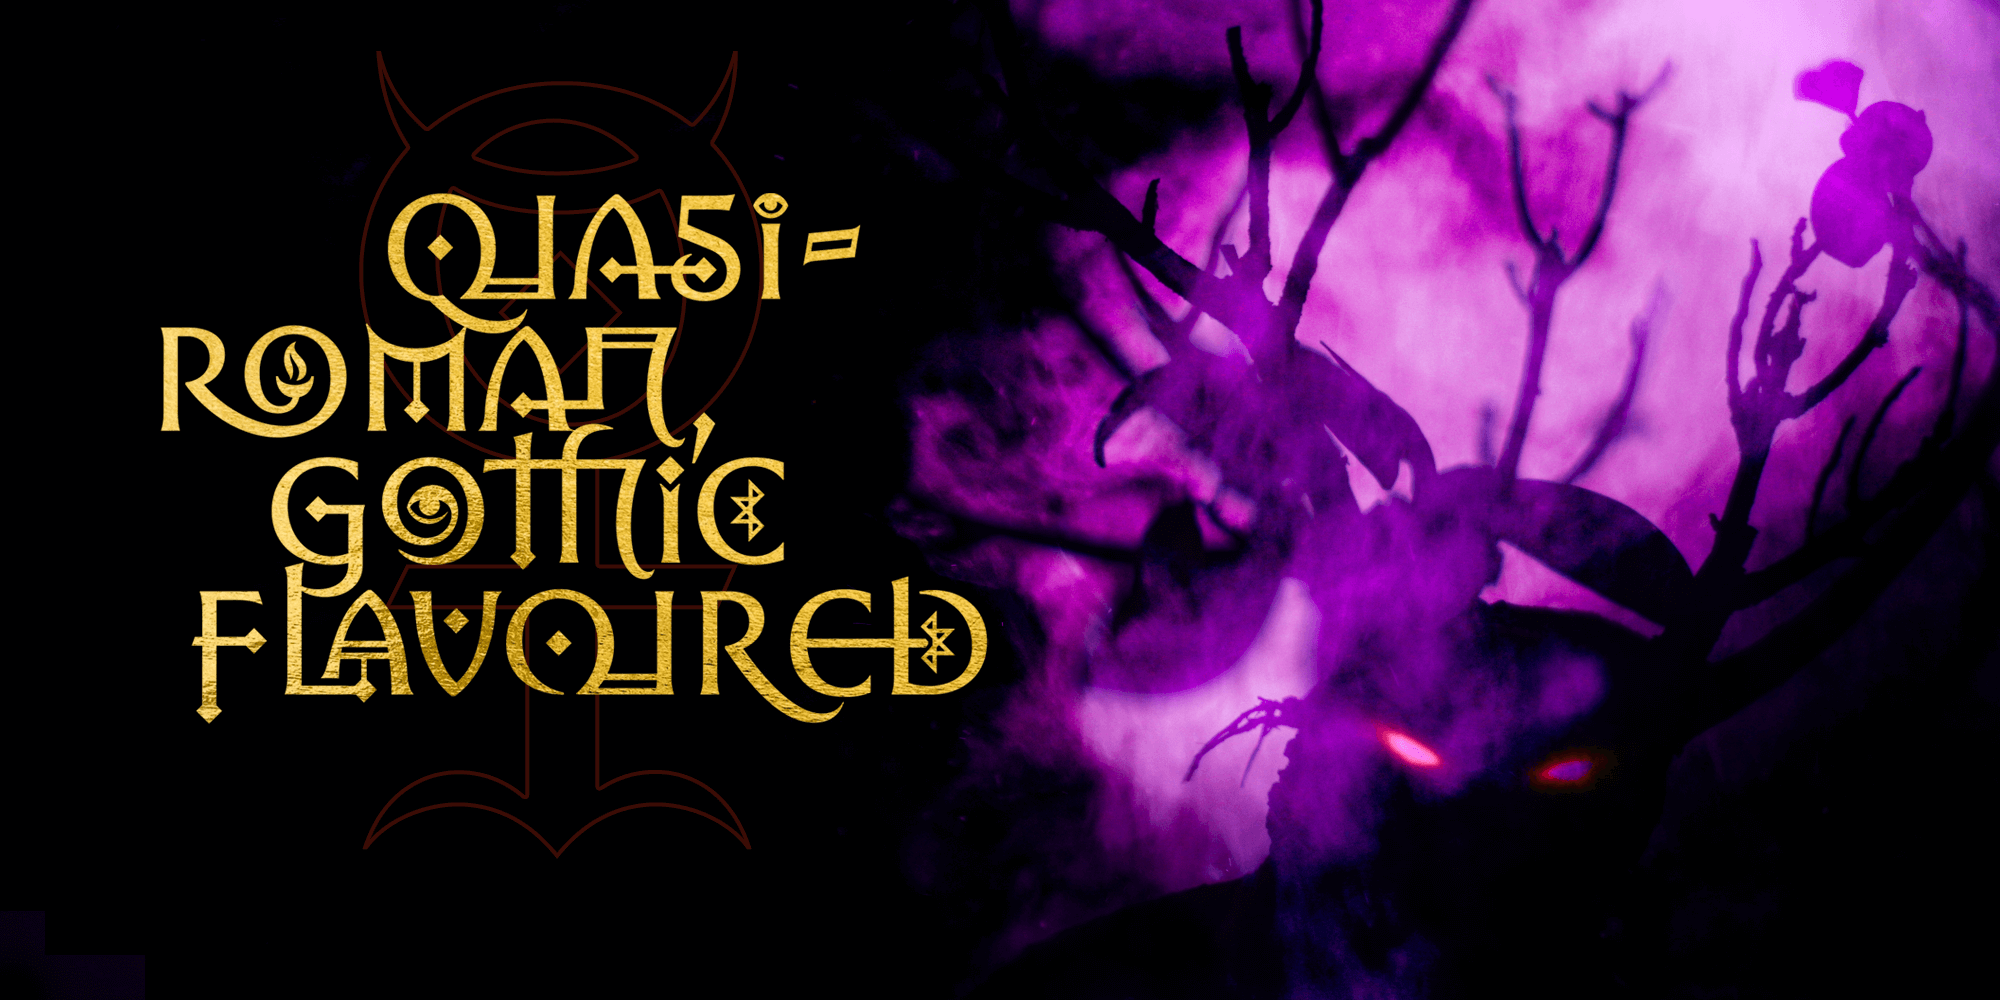 Rahere Esoteric, a quasi-Roman, gothic-flavoured display font